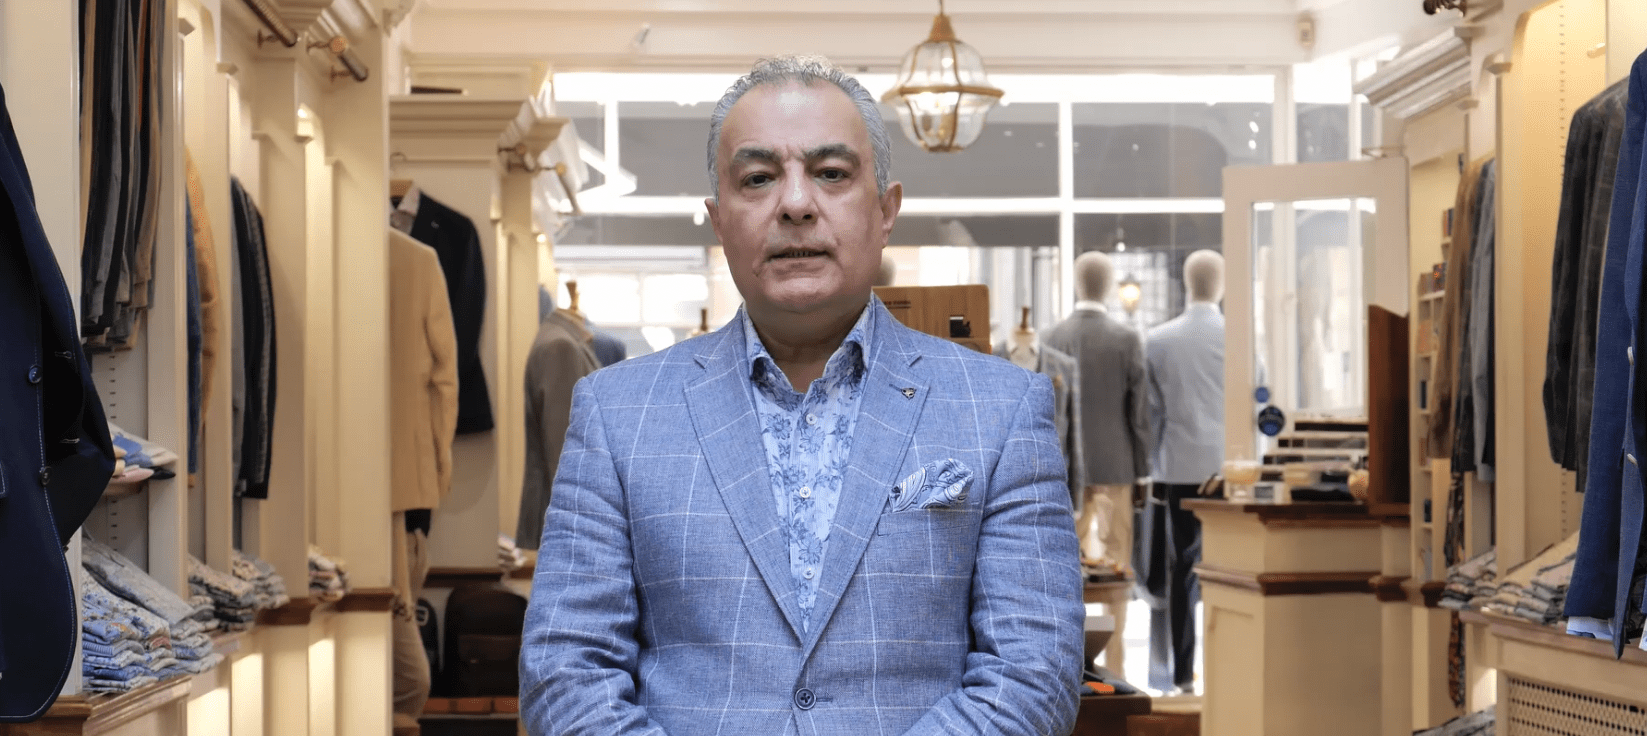 Ali talks about suits and tailoring at Gabucci Bath